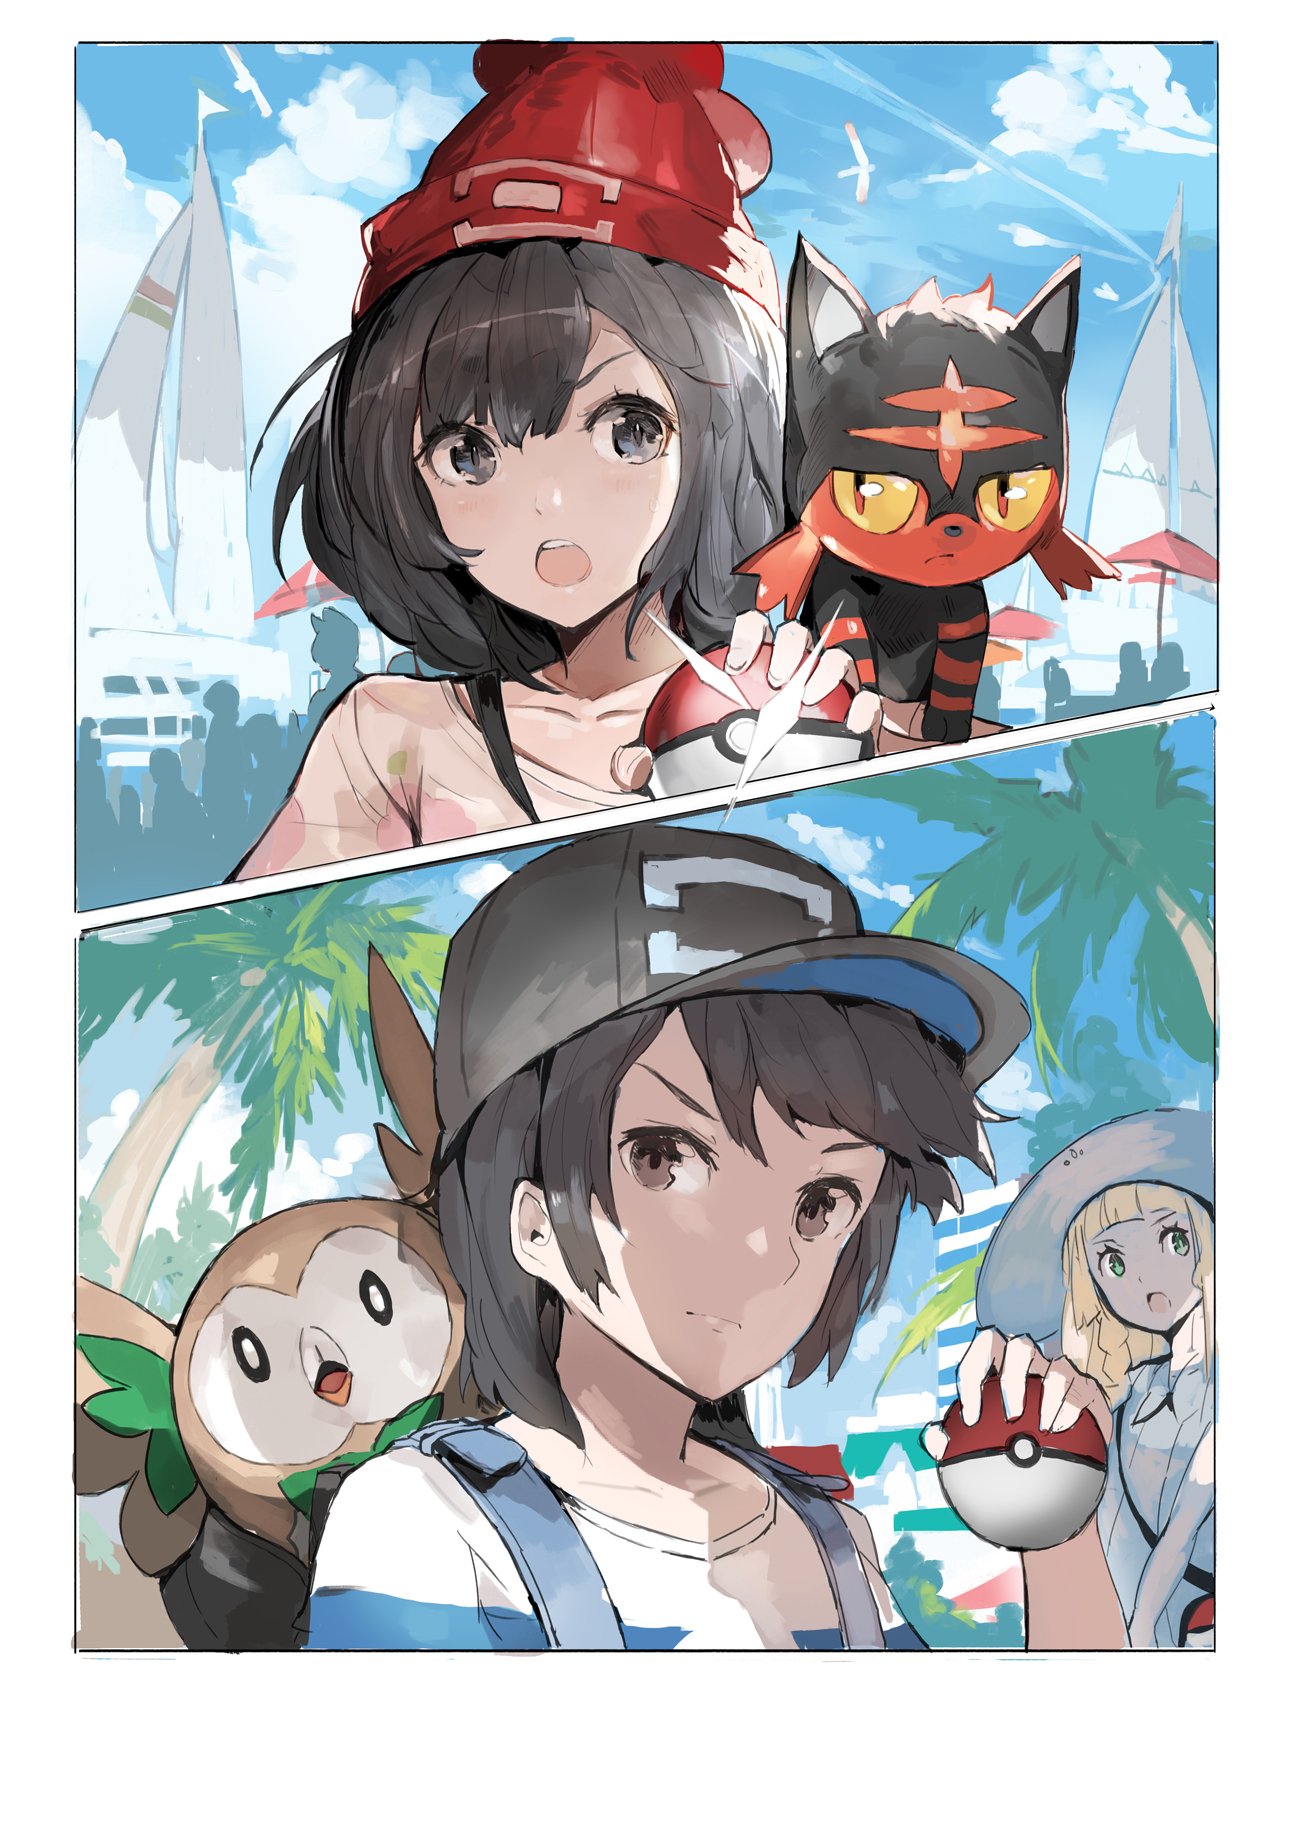 &gt;:o 1boy 1girl 2koma :o andrian_gilang bag baseball_cap beanie black_eyes black_hair closed_mouth clouds comic day face female_protagonist_(pokemon_sm) floral_print green_eyes hat highres holding holding_poke_ball lillie_(pokemon) litten male_protagonist_(pokemon_sm) on_shoulder open_mouth poke_ball pokemon pokemon_(creature) pokemon_(game) pokemon_sm rowlet shirt short_hair short_sleeves simple_background sky striped striped_shirt sun_hat tree white_background